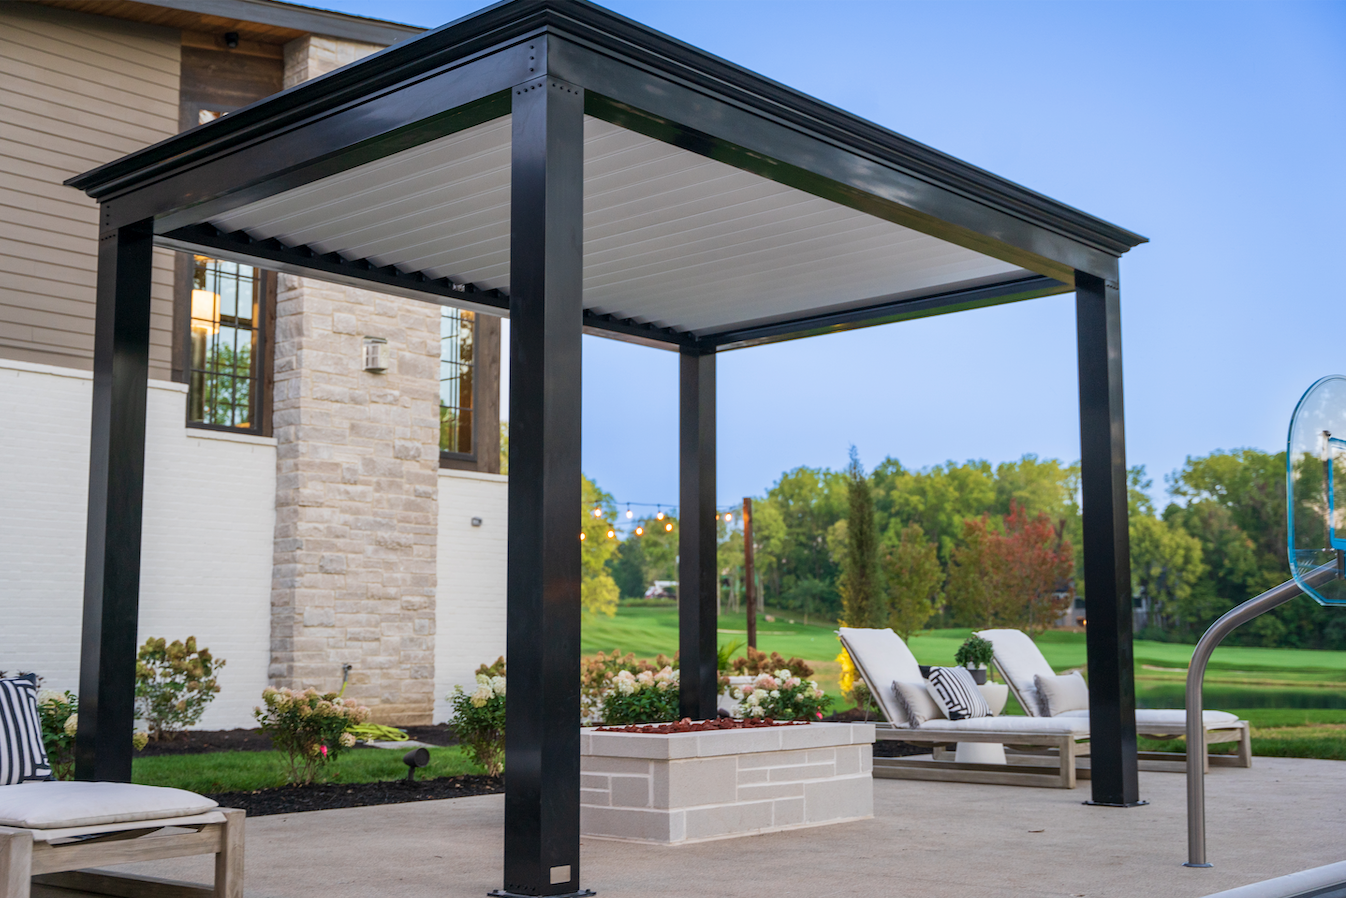 A Freestanding pergola could be the right pergola for you.  Choosing the right size is a general rule when creating your outdoor space.